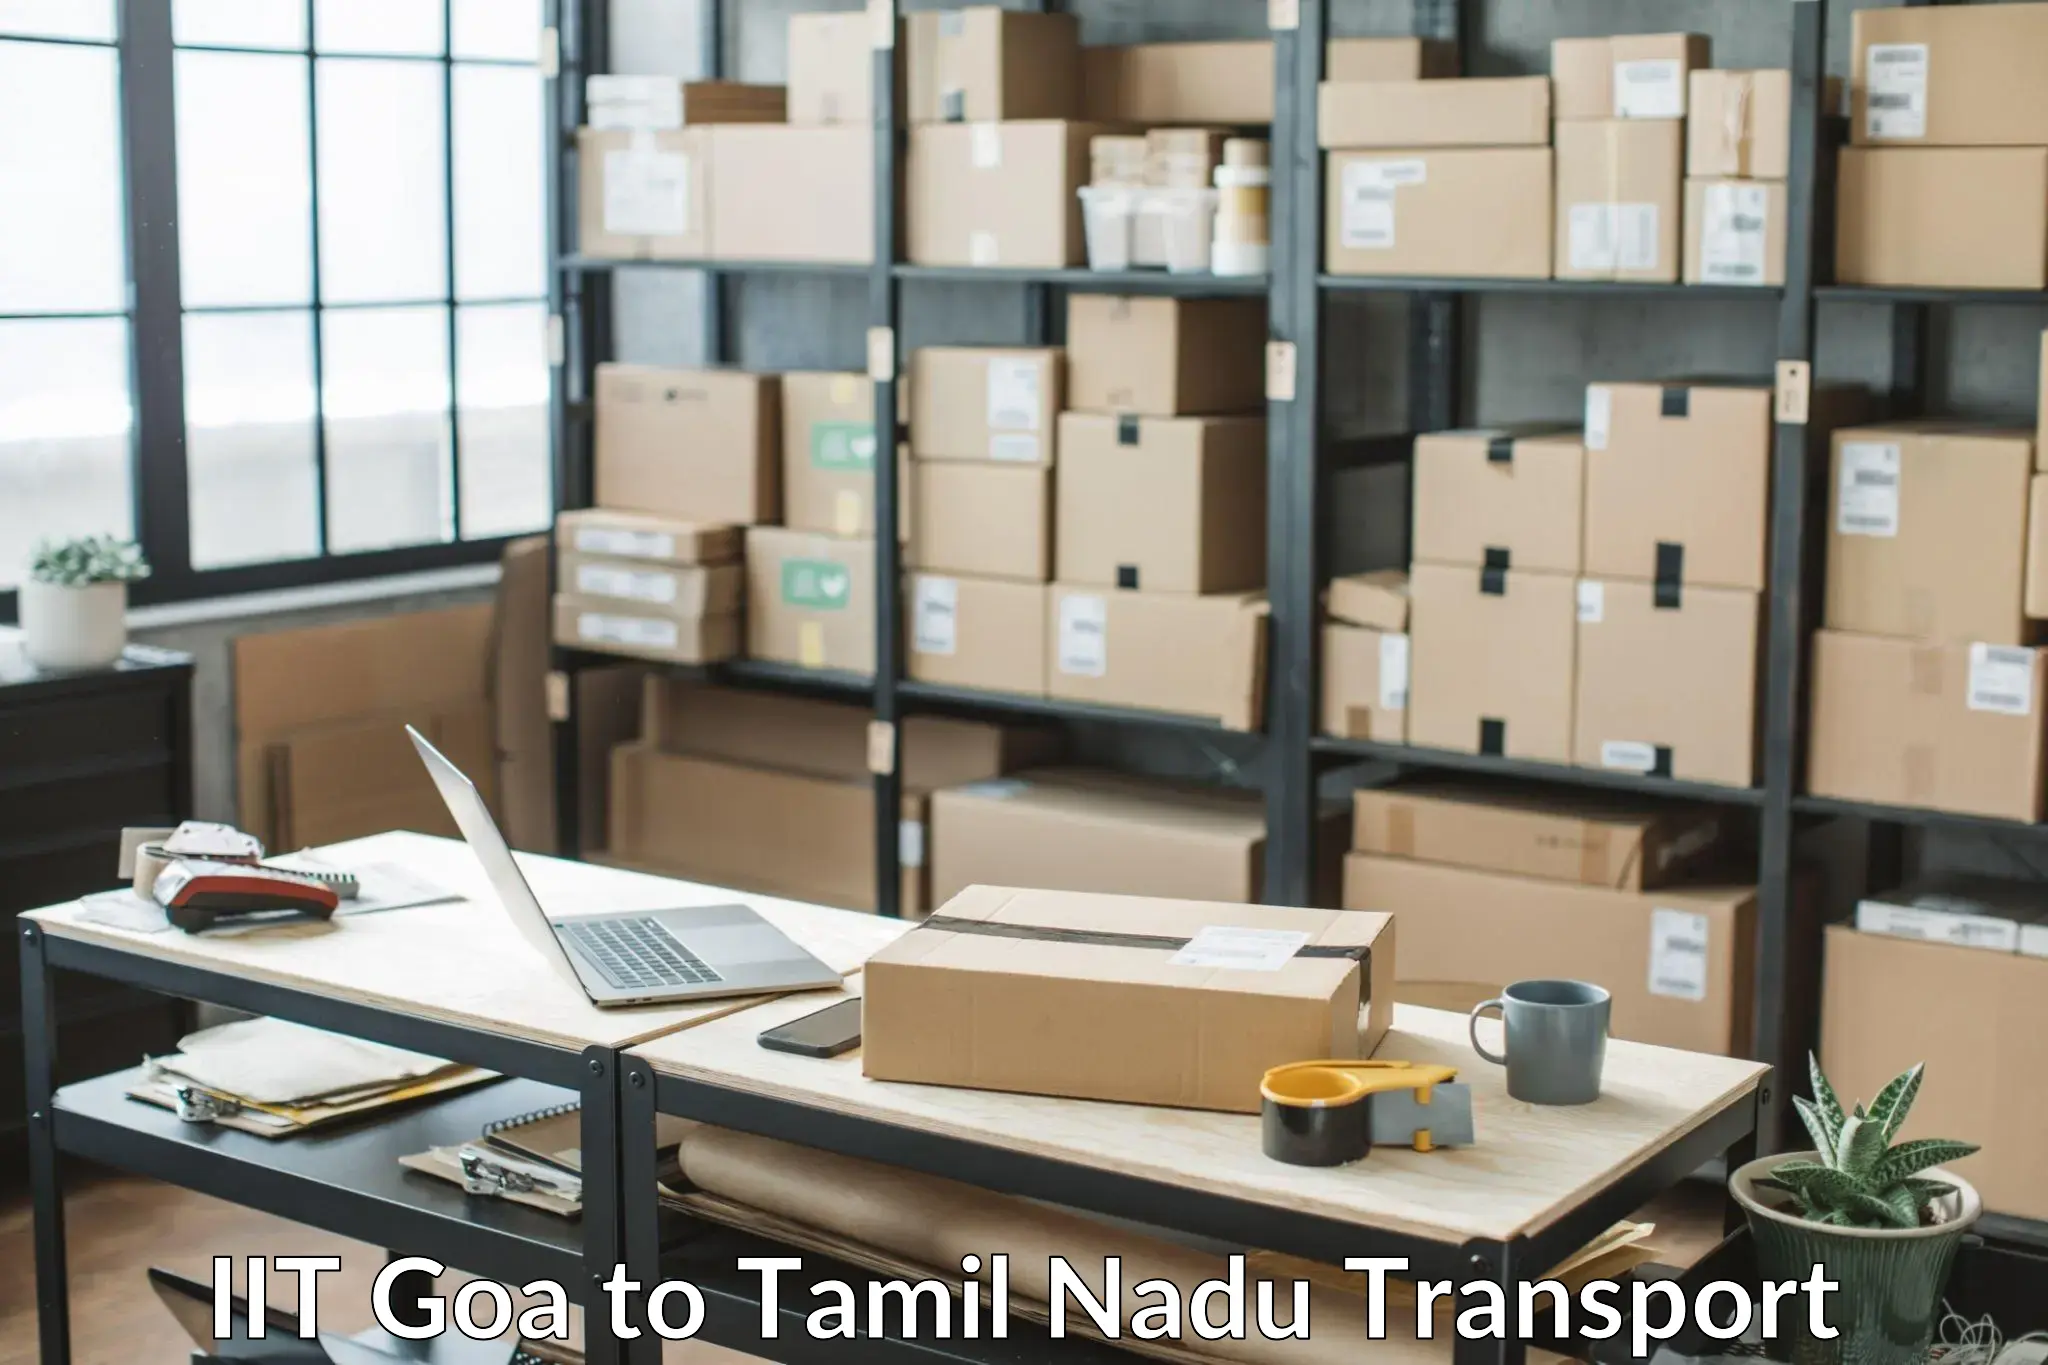 Express transport services IIT Goa to Hosur